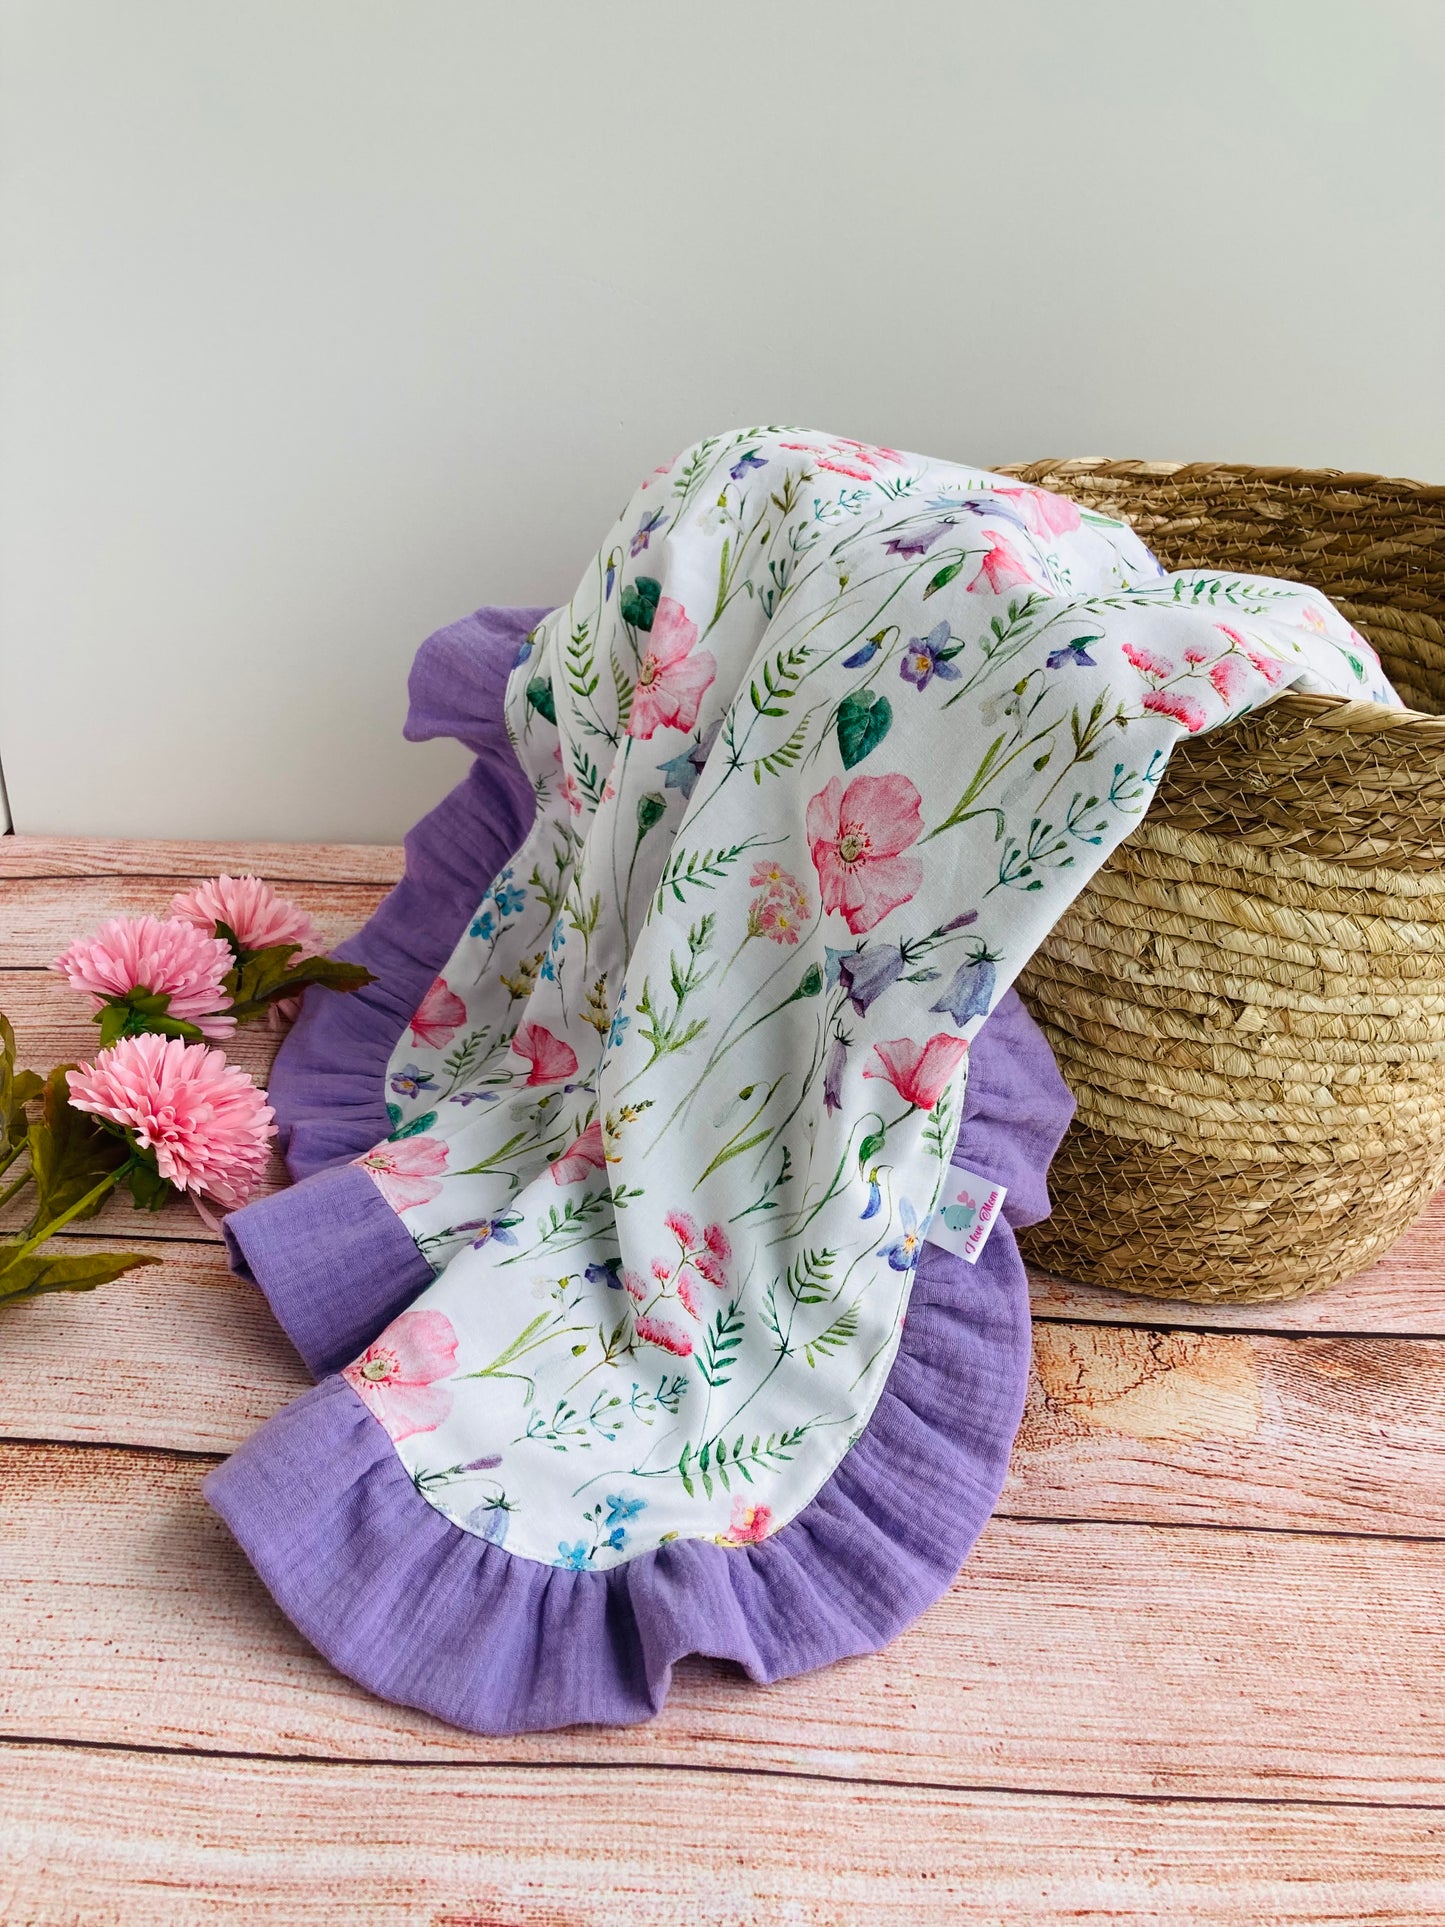 2 layer Muslin baby blanket with ruffles -  Meadows and lavender